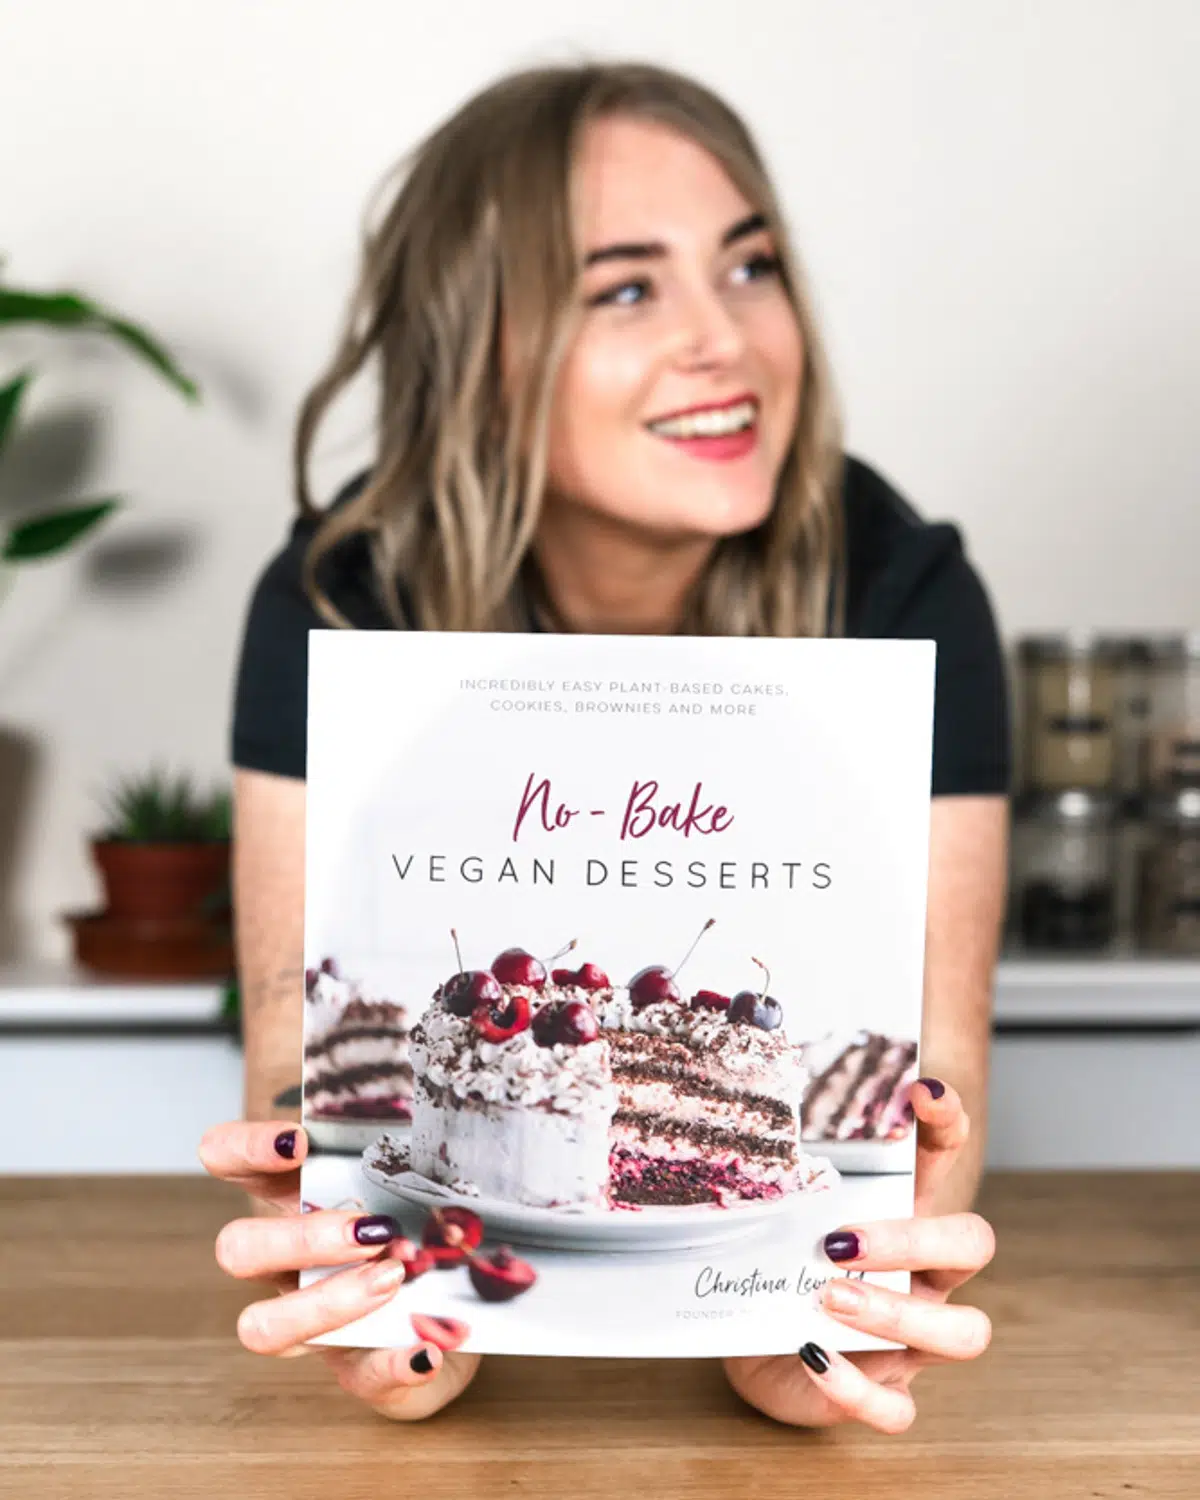 vegan desserts cookbook author holding up a book with a picture of a vegan cake on it.